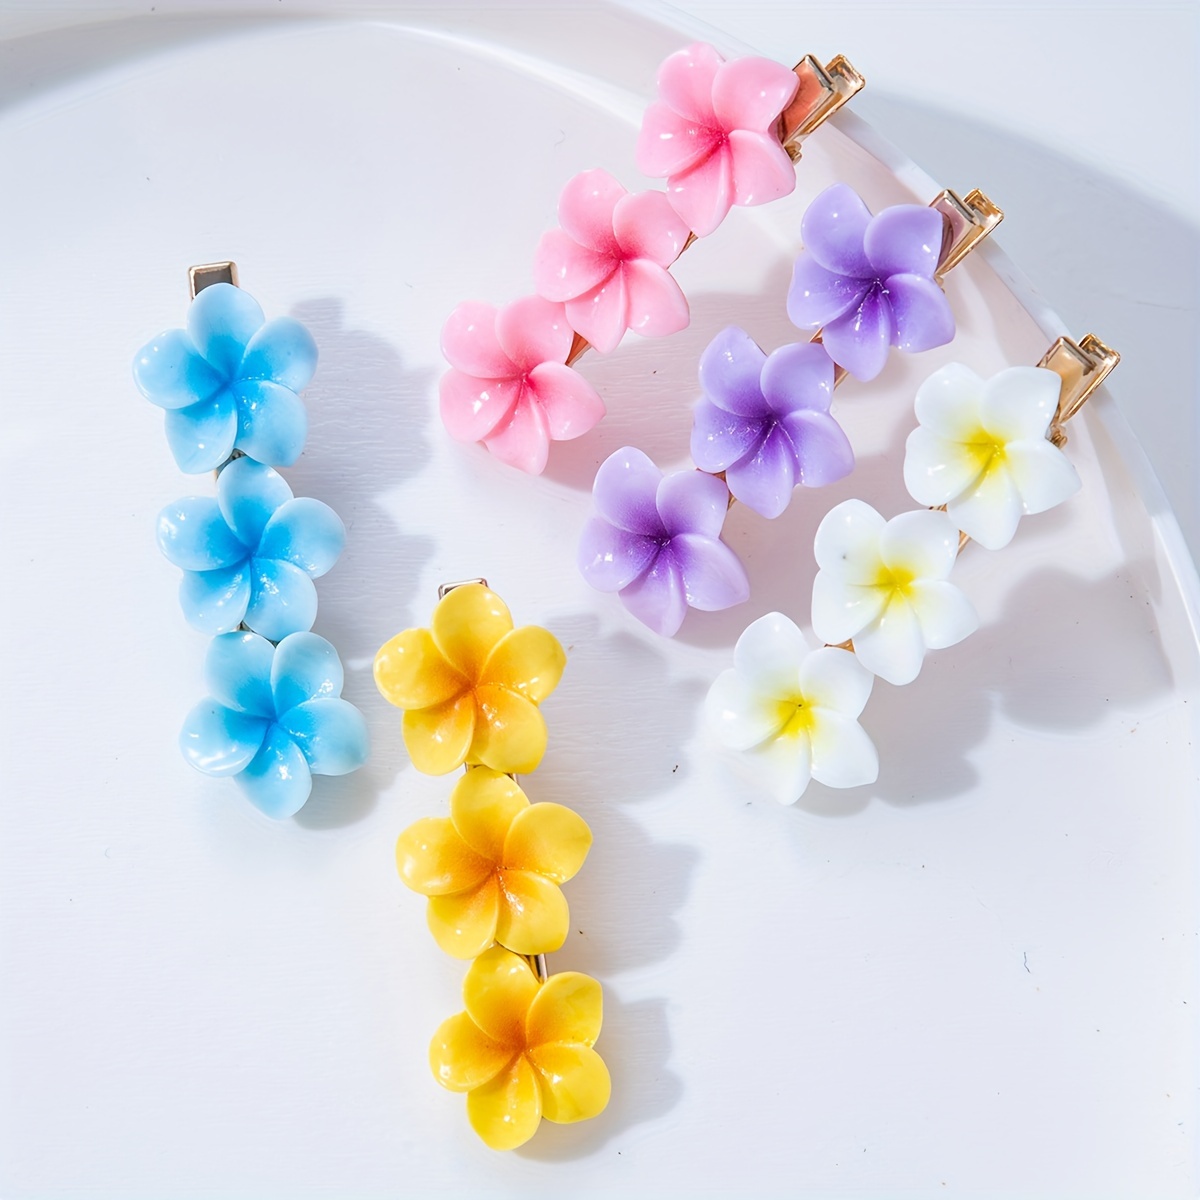 

5-pack Cute Minimalist Flower Hair Clips For Women, Multi-color Resin Floral Metal Barrettes, Solid Color Hair Accessories For Girls Age 14+, Trendy Hairpins Set With Flower Design.